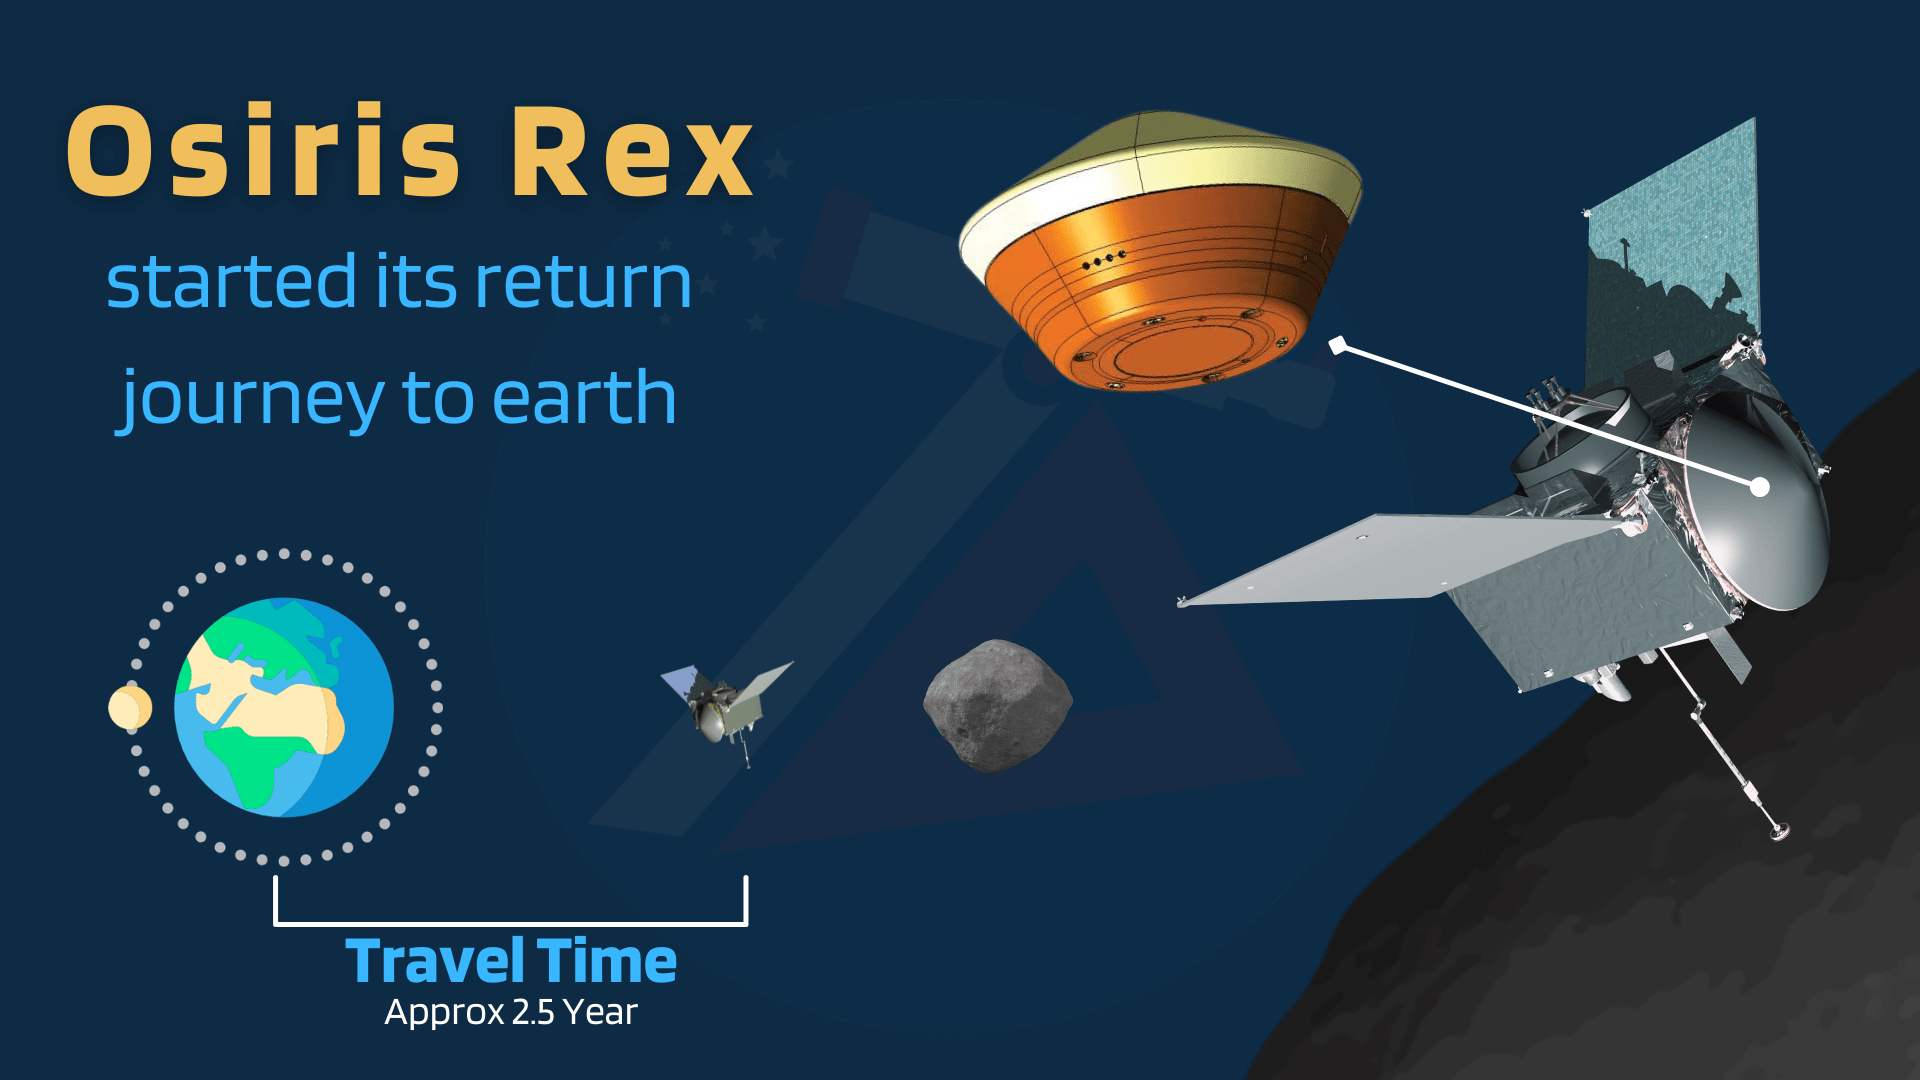 Osiris Rex started its return journey to earth